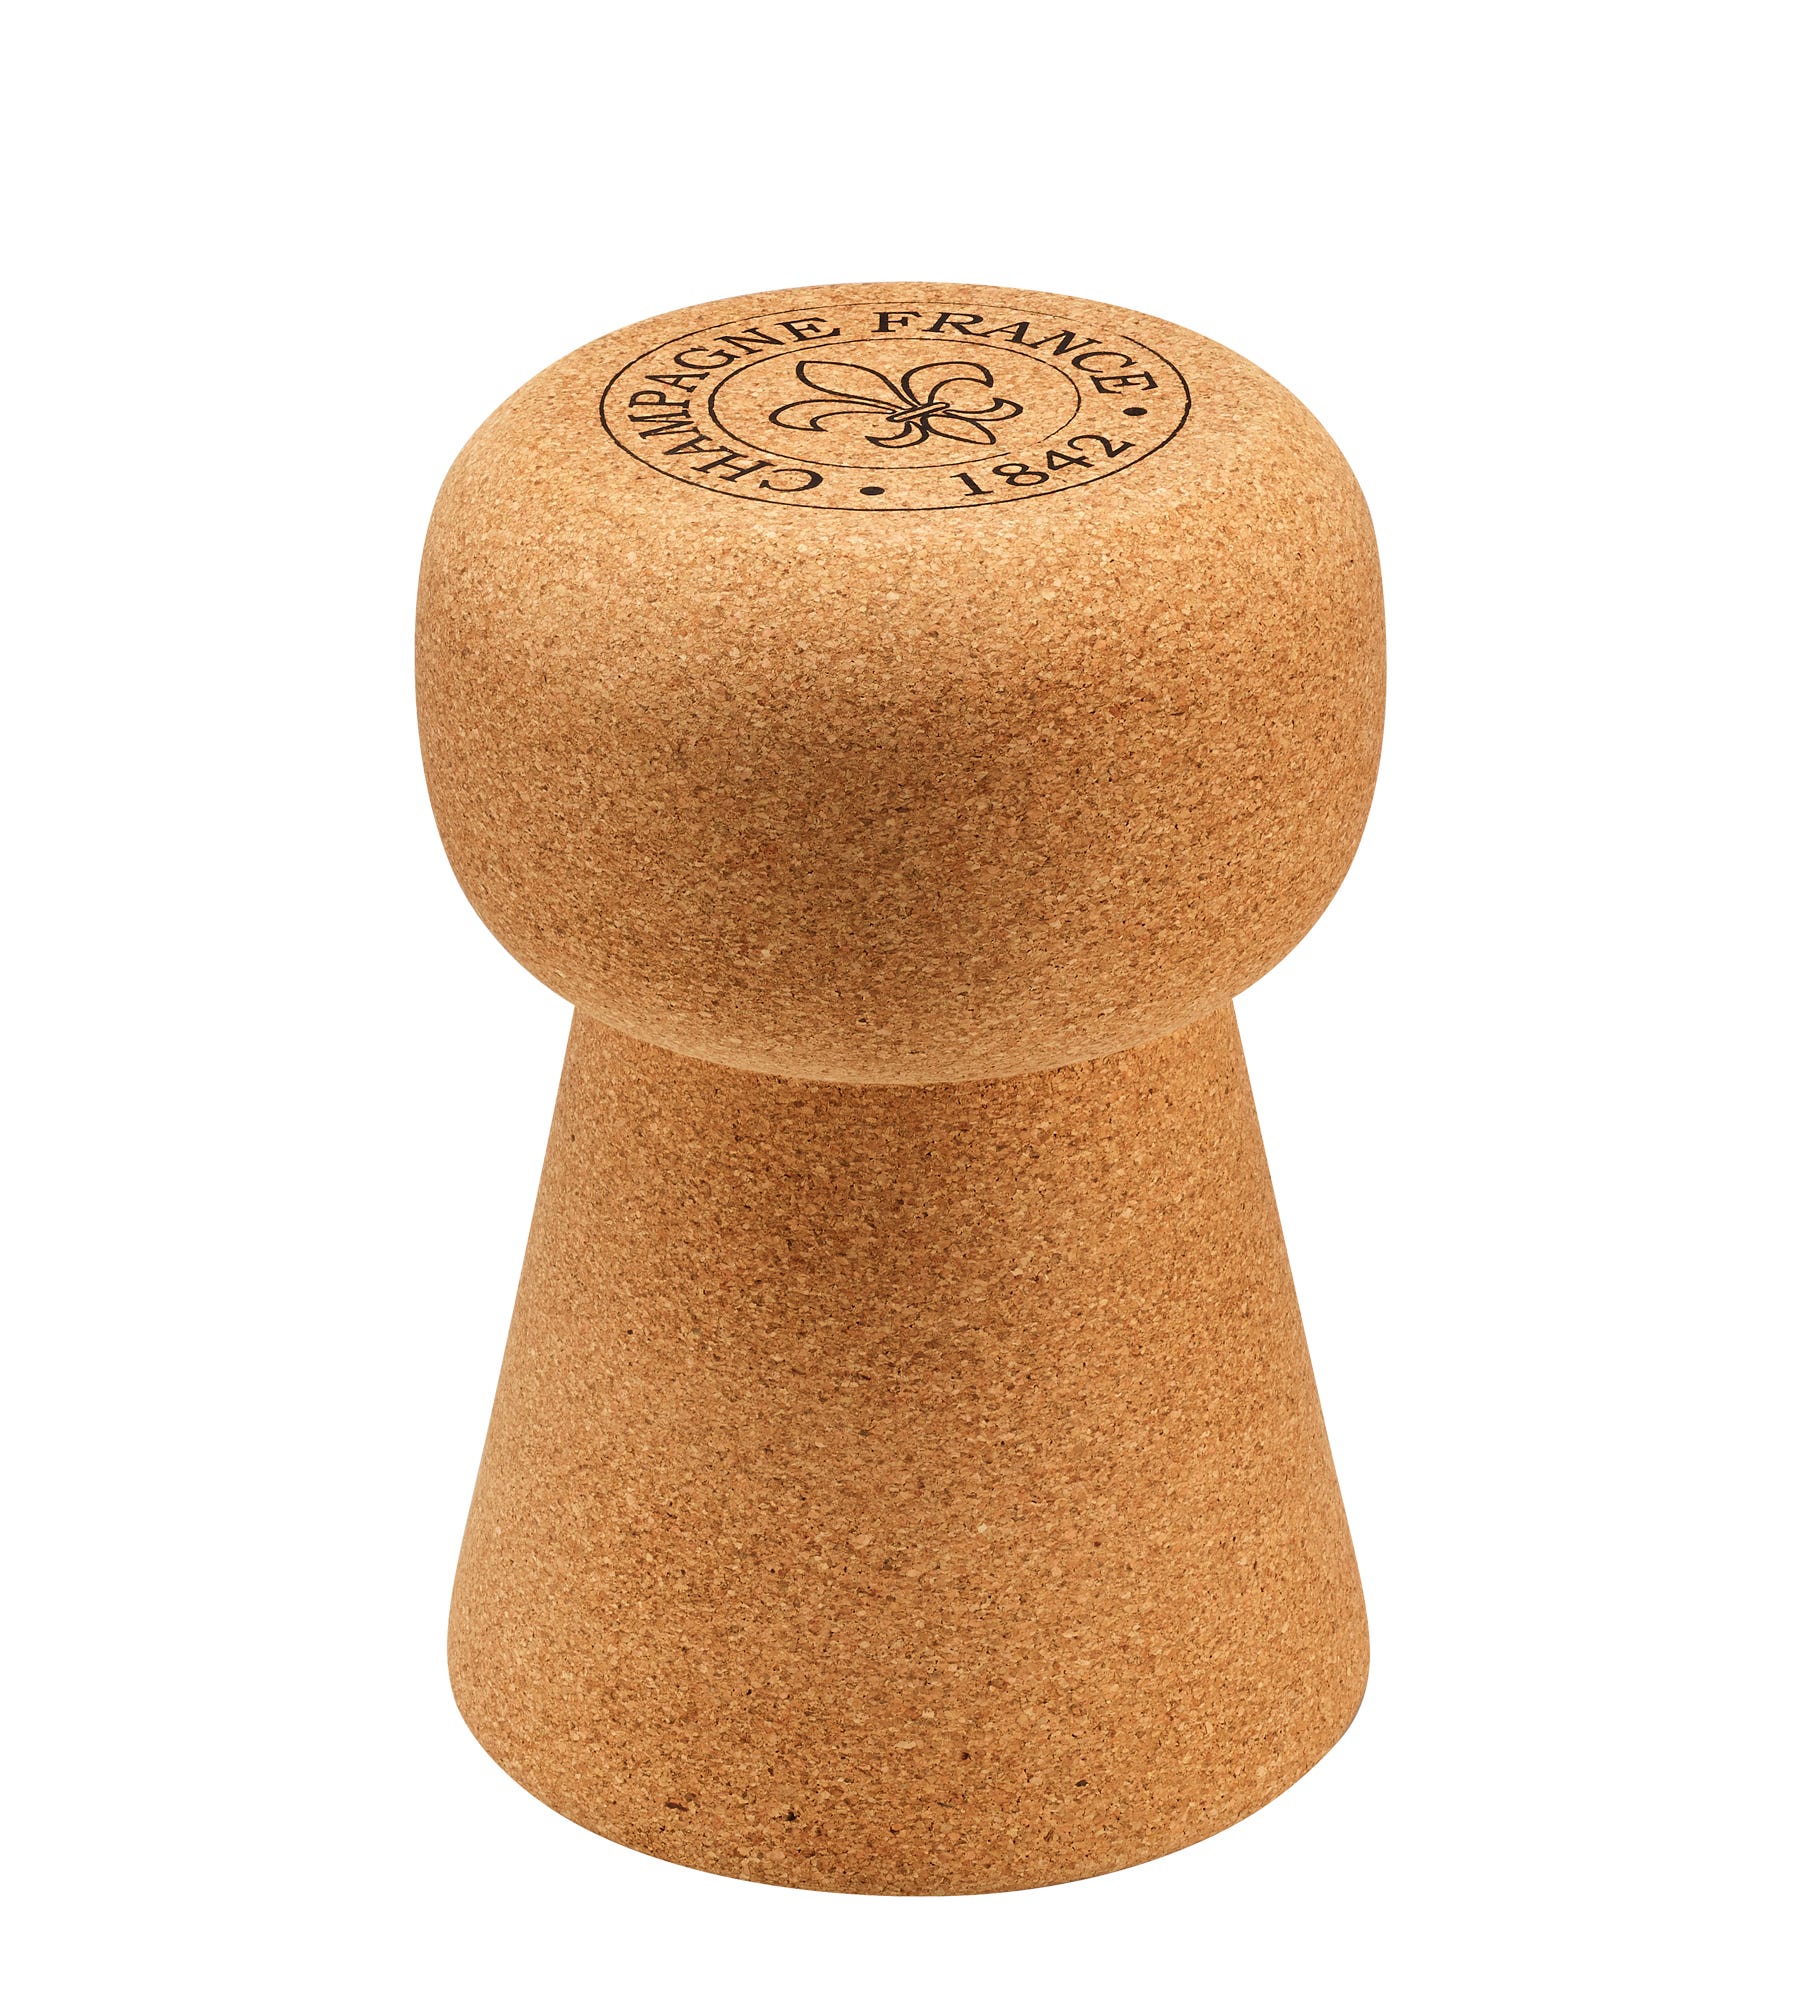 An image of The Champagne Cork Stool